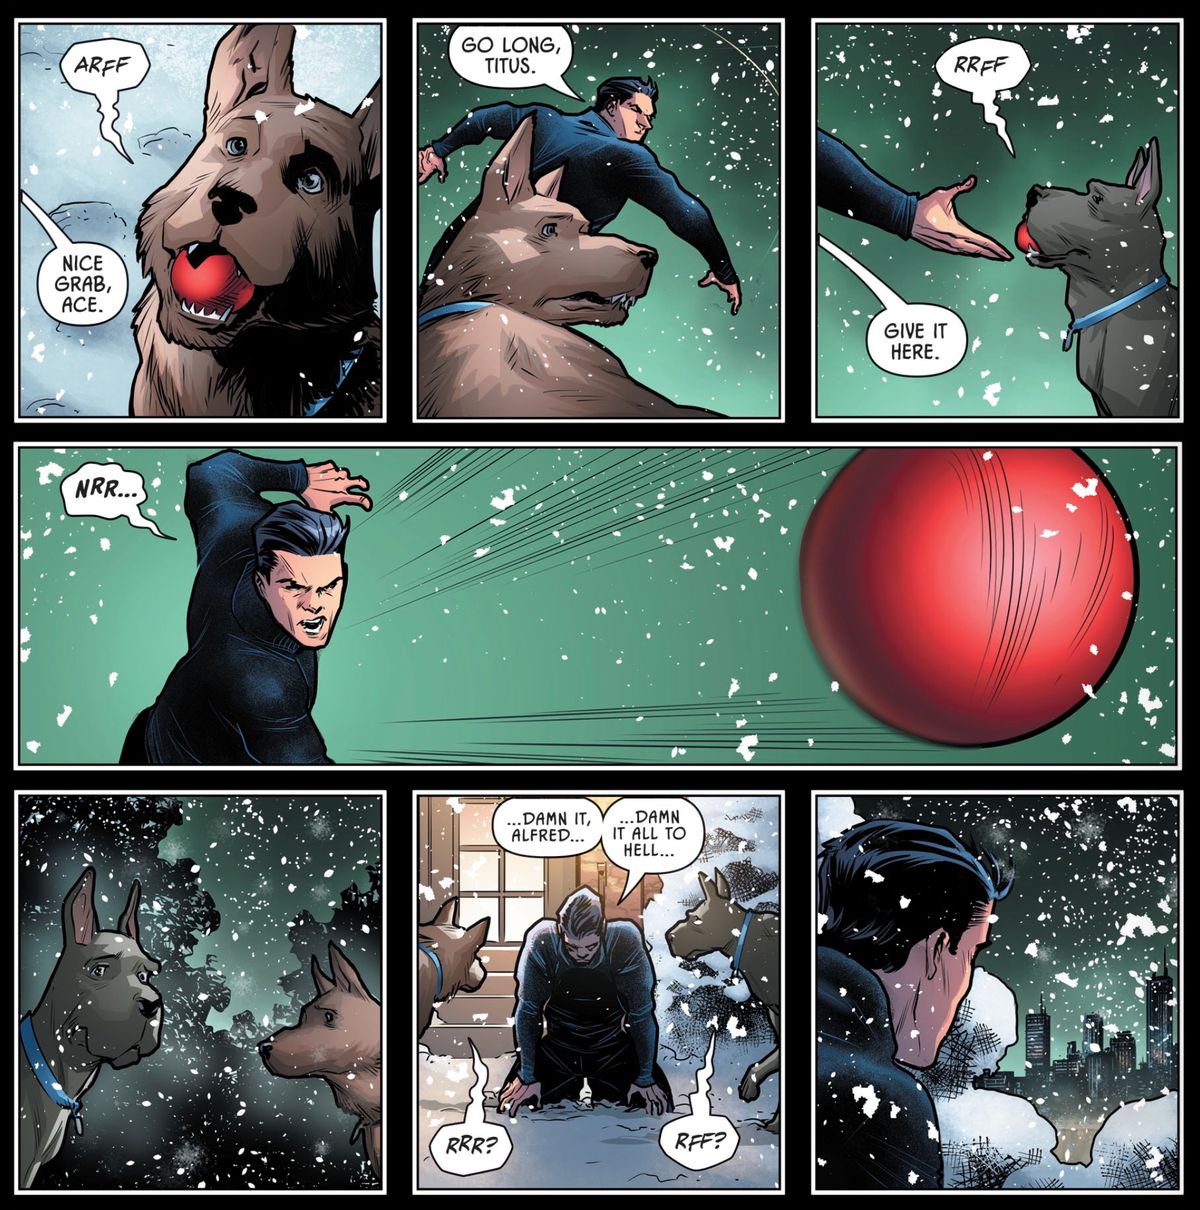 Batman throws a ball for the Wayne family dogs, Ace and Titus, and then collapses to his knees. “Damn it, Alfred...” he gasps, “Damn it all to hell...” in Detective Comics #1018, DC Comics (2020).